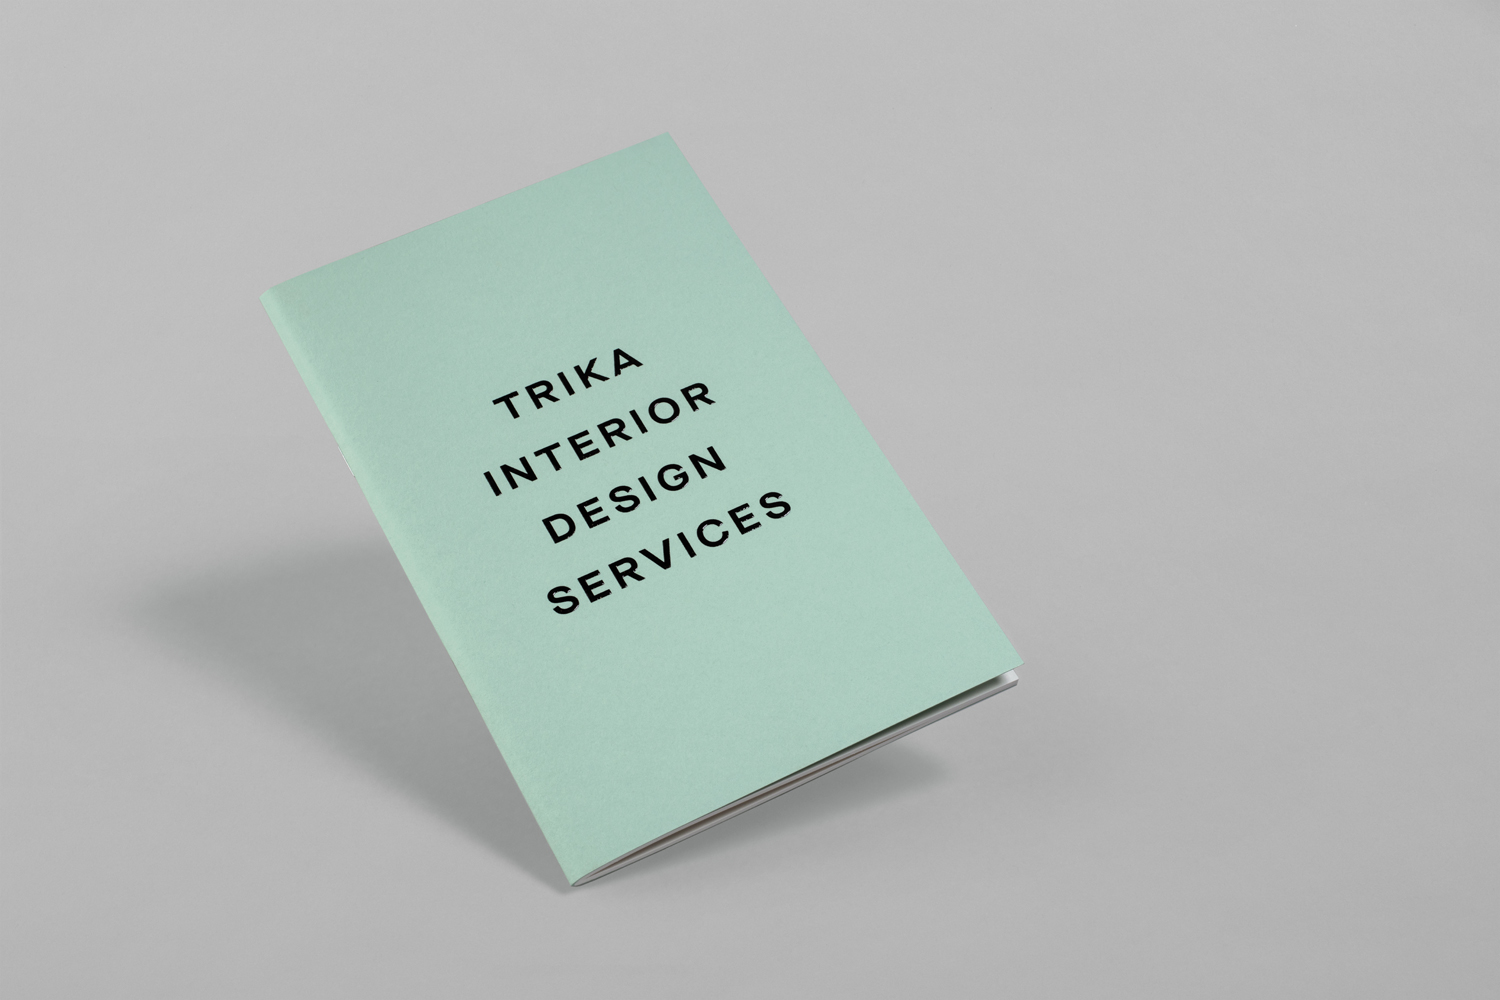 Brand identity and notebook with a thermographic ink print finish by UK design studio Bunch for Croatian interior design business Trika